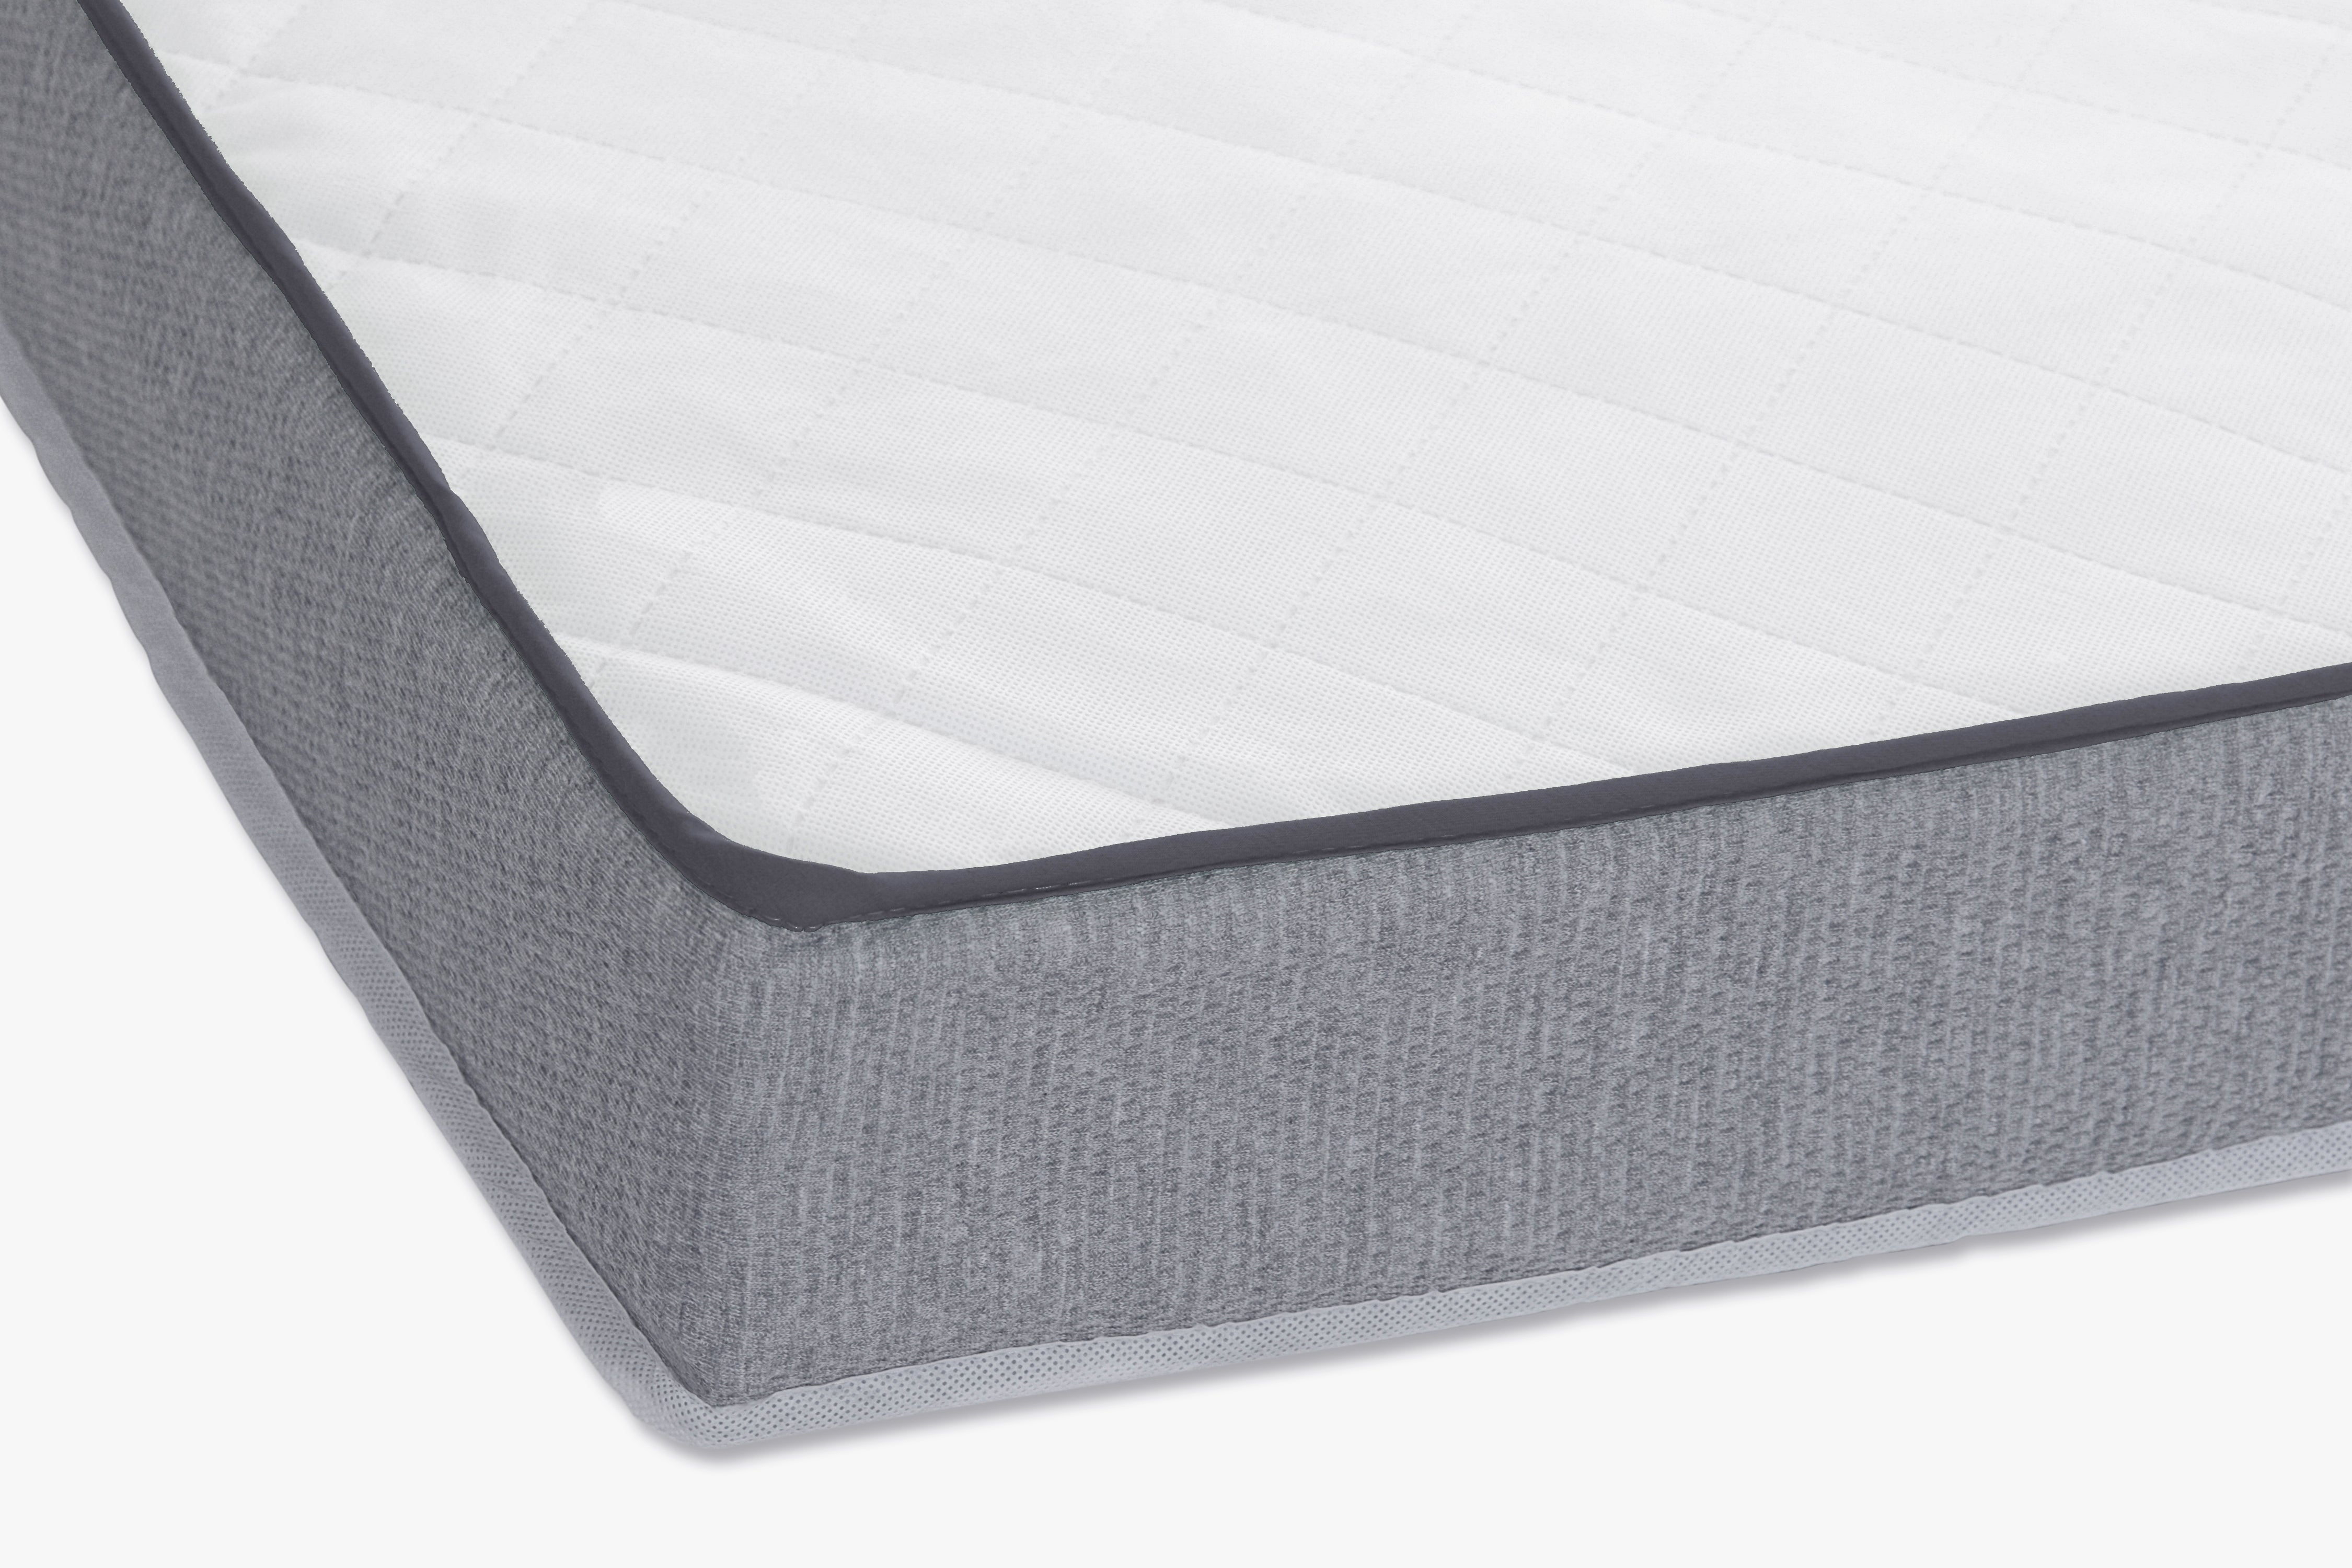 Comfy Eco Spring Baby Mattress 140x70cm - 15% OFF Applied at Checkout